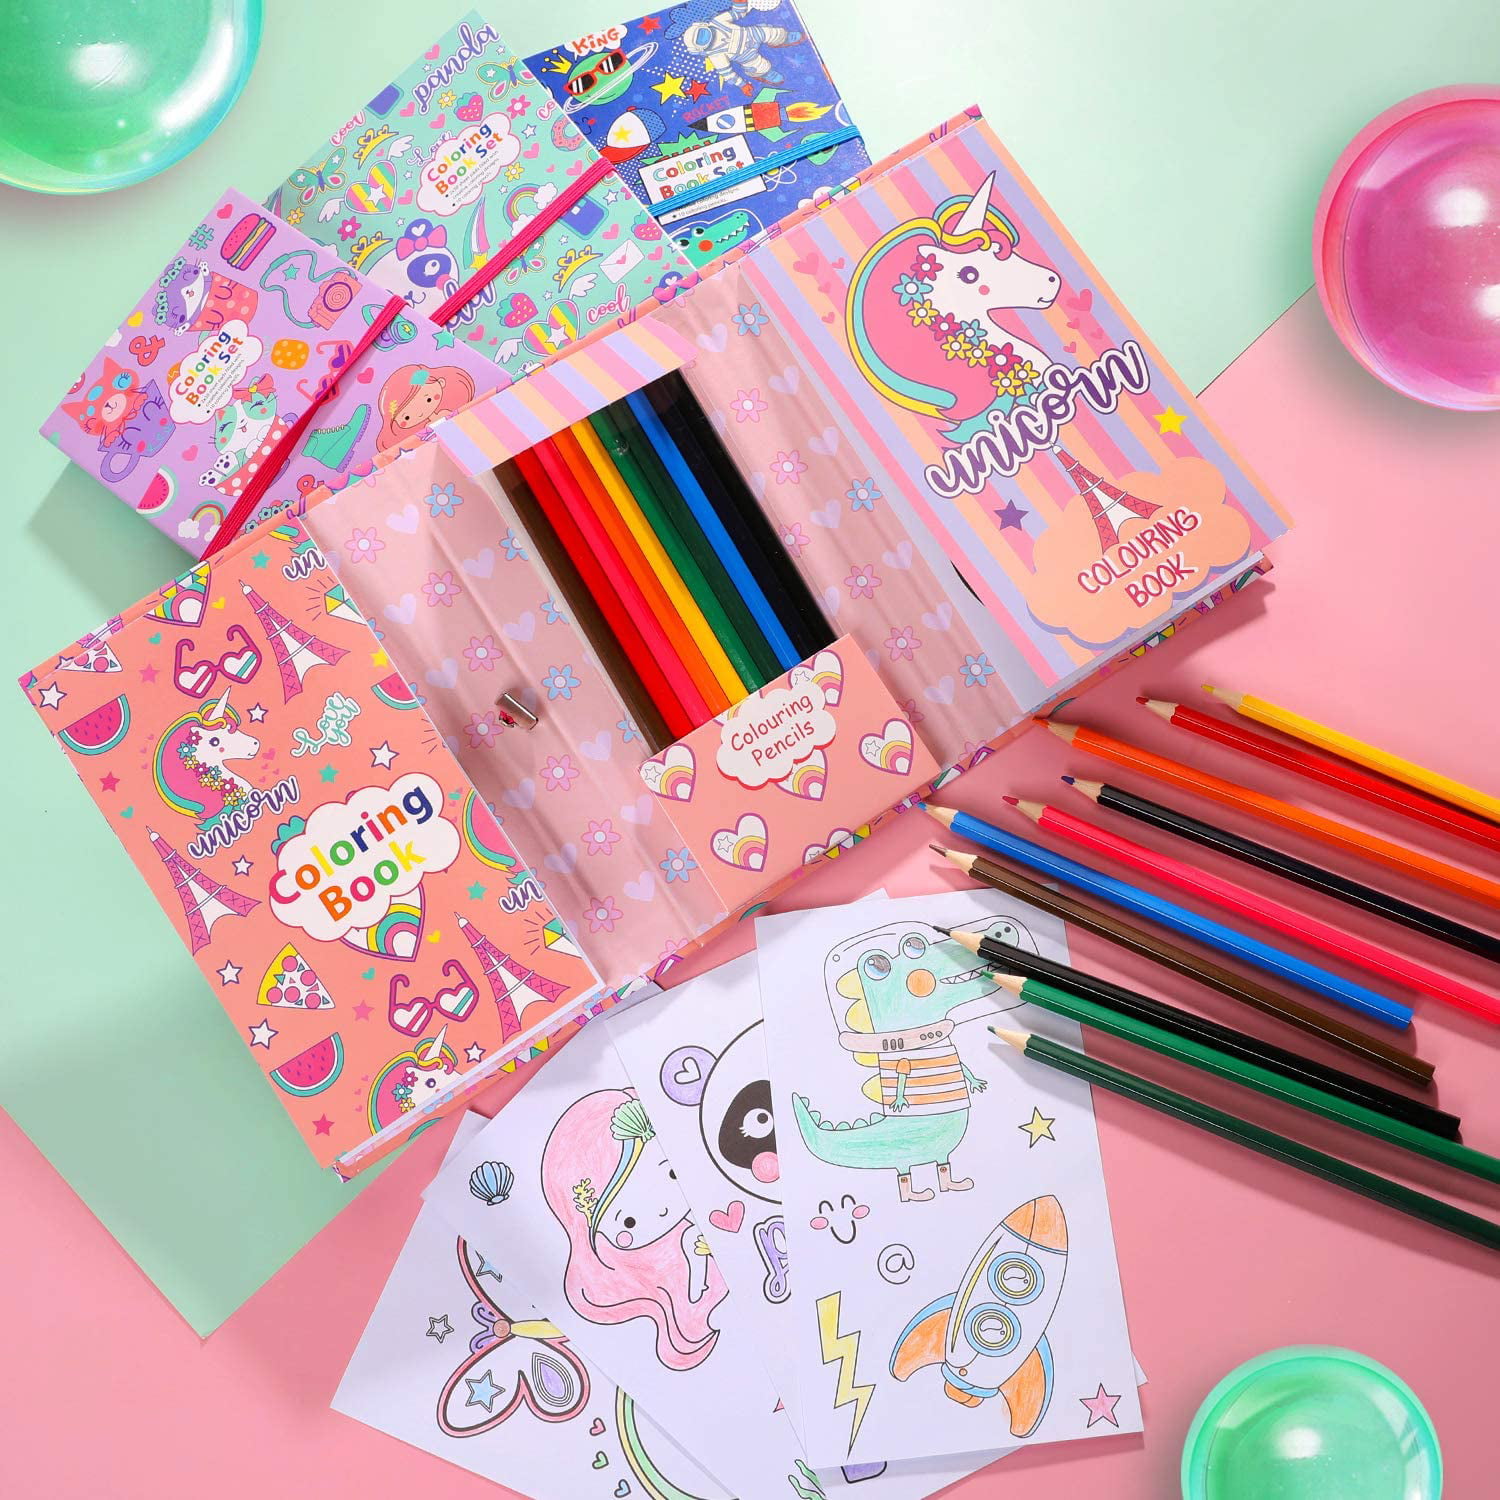 YOYTOO Cat Coloring Pads Kit for Girls, Unicorn Coloring Book with 30  Coloring Pages 10 Rainbow Scratch Papers 16 Colored Pencils for Drawing